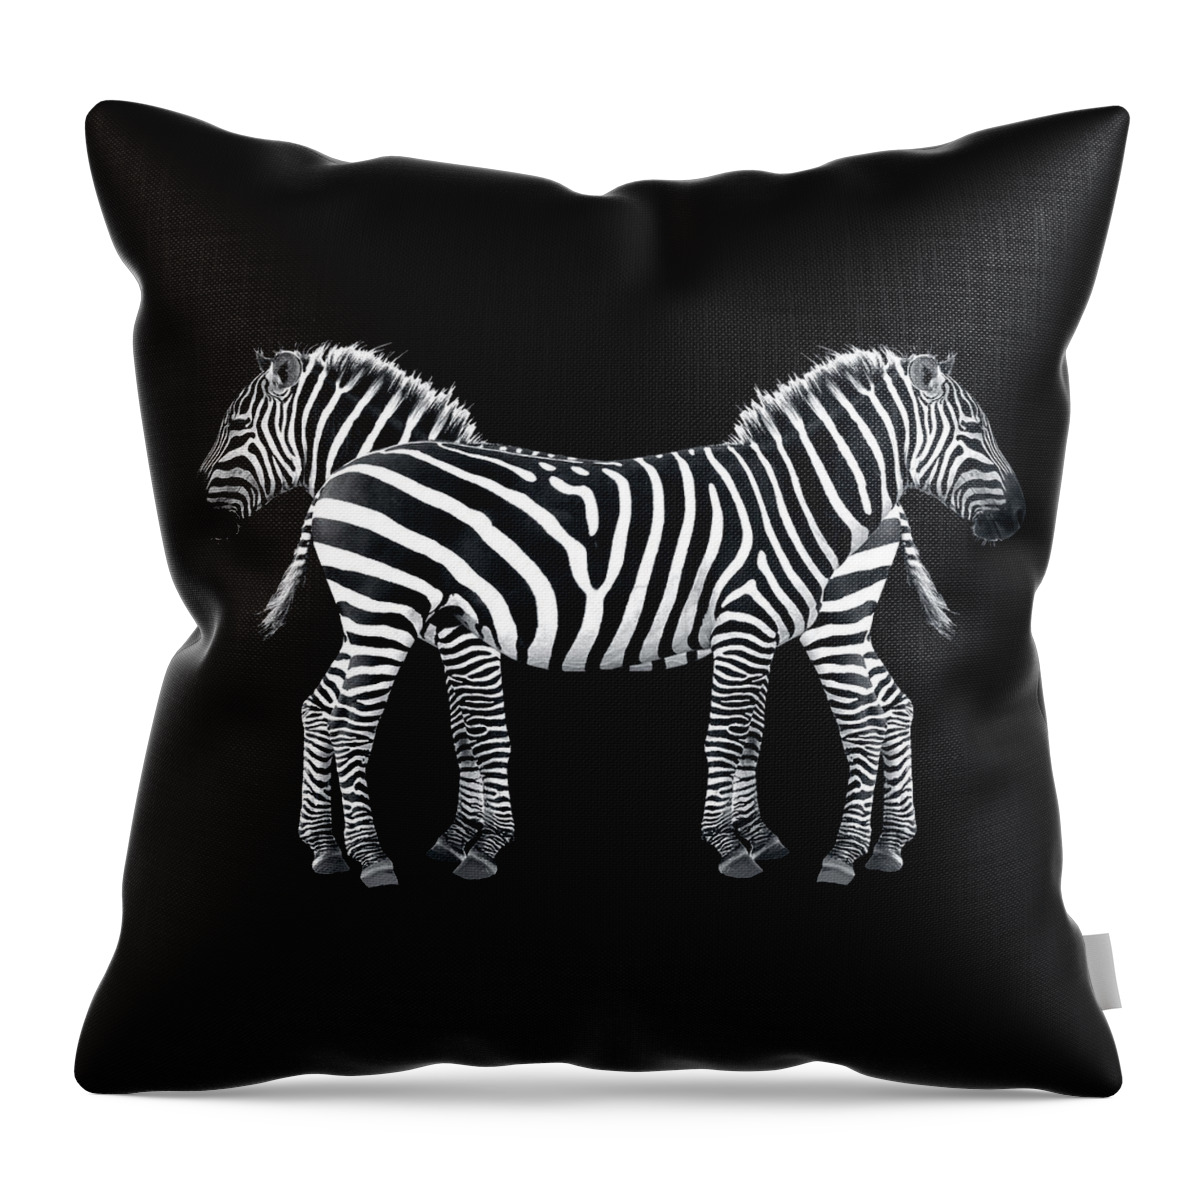 Africa Throw Pillow featuring the photograph Zebra Pair On Black by Gill Billington